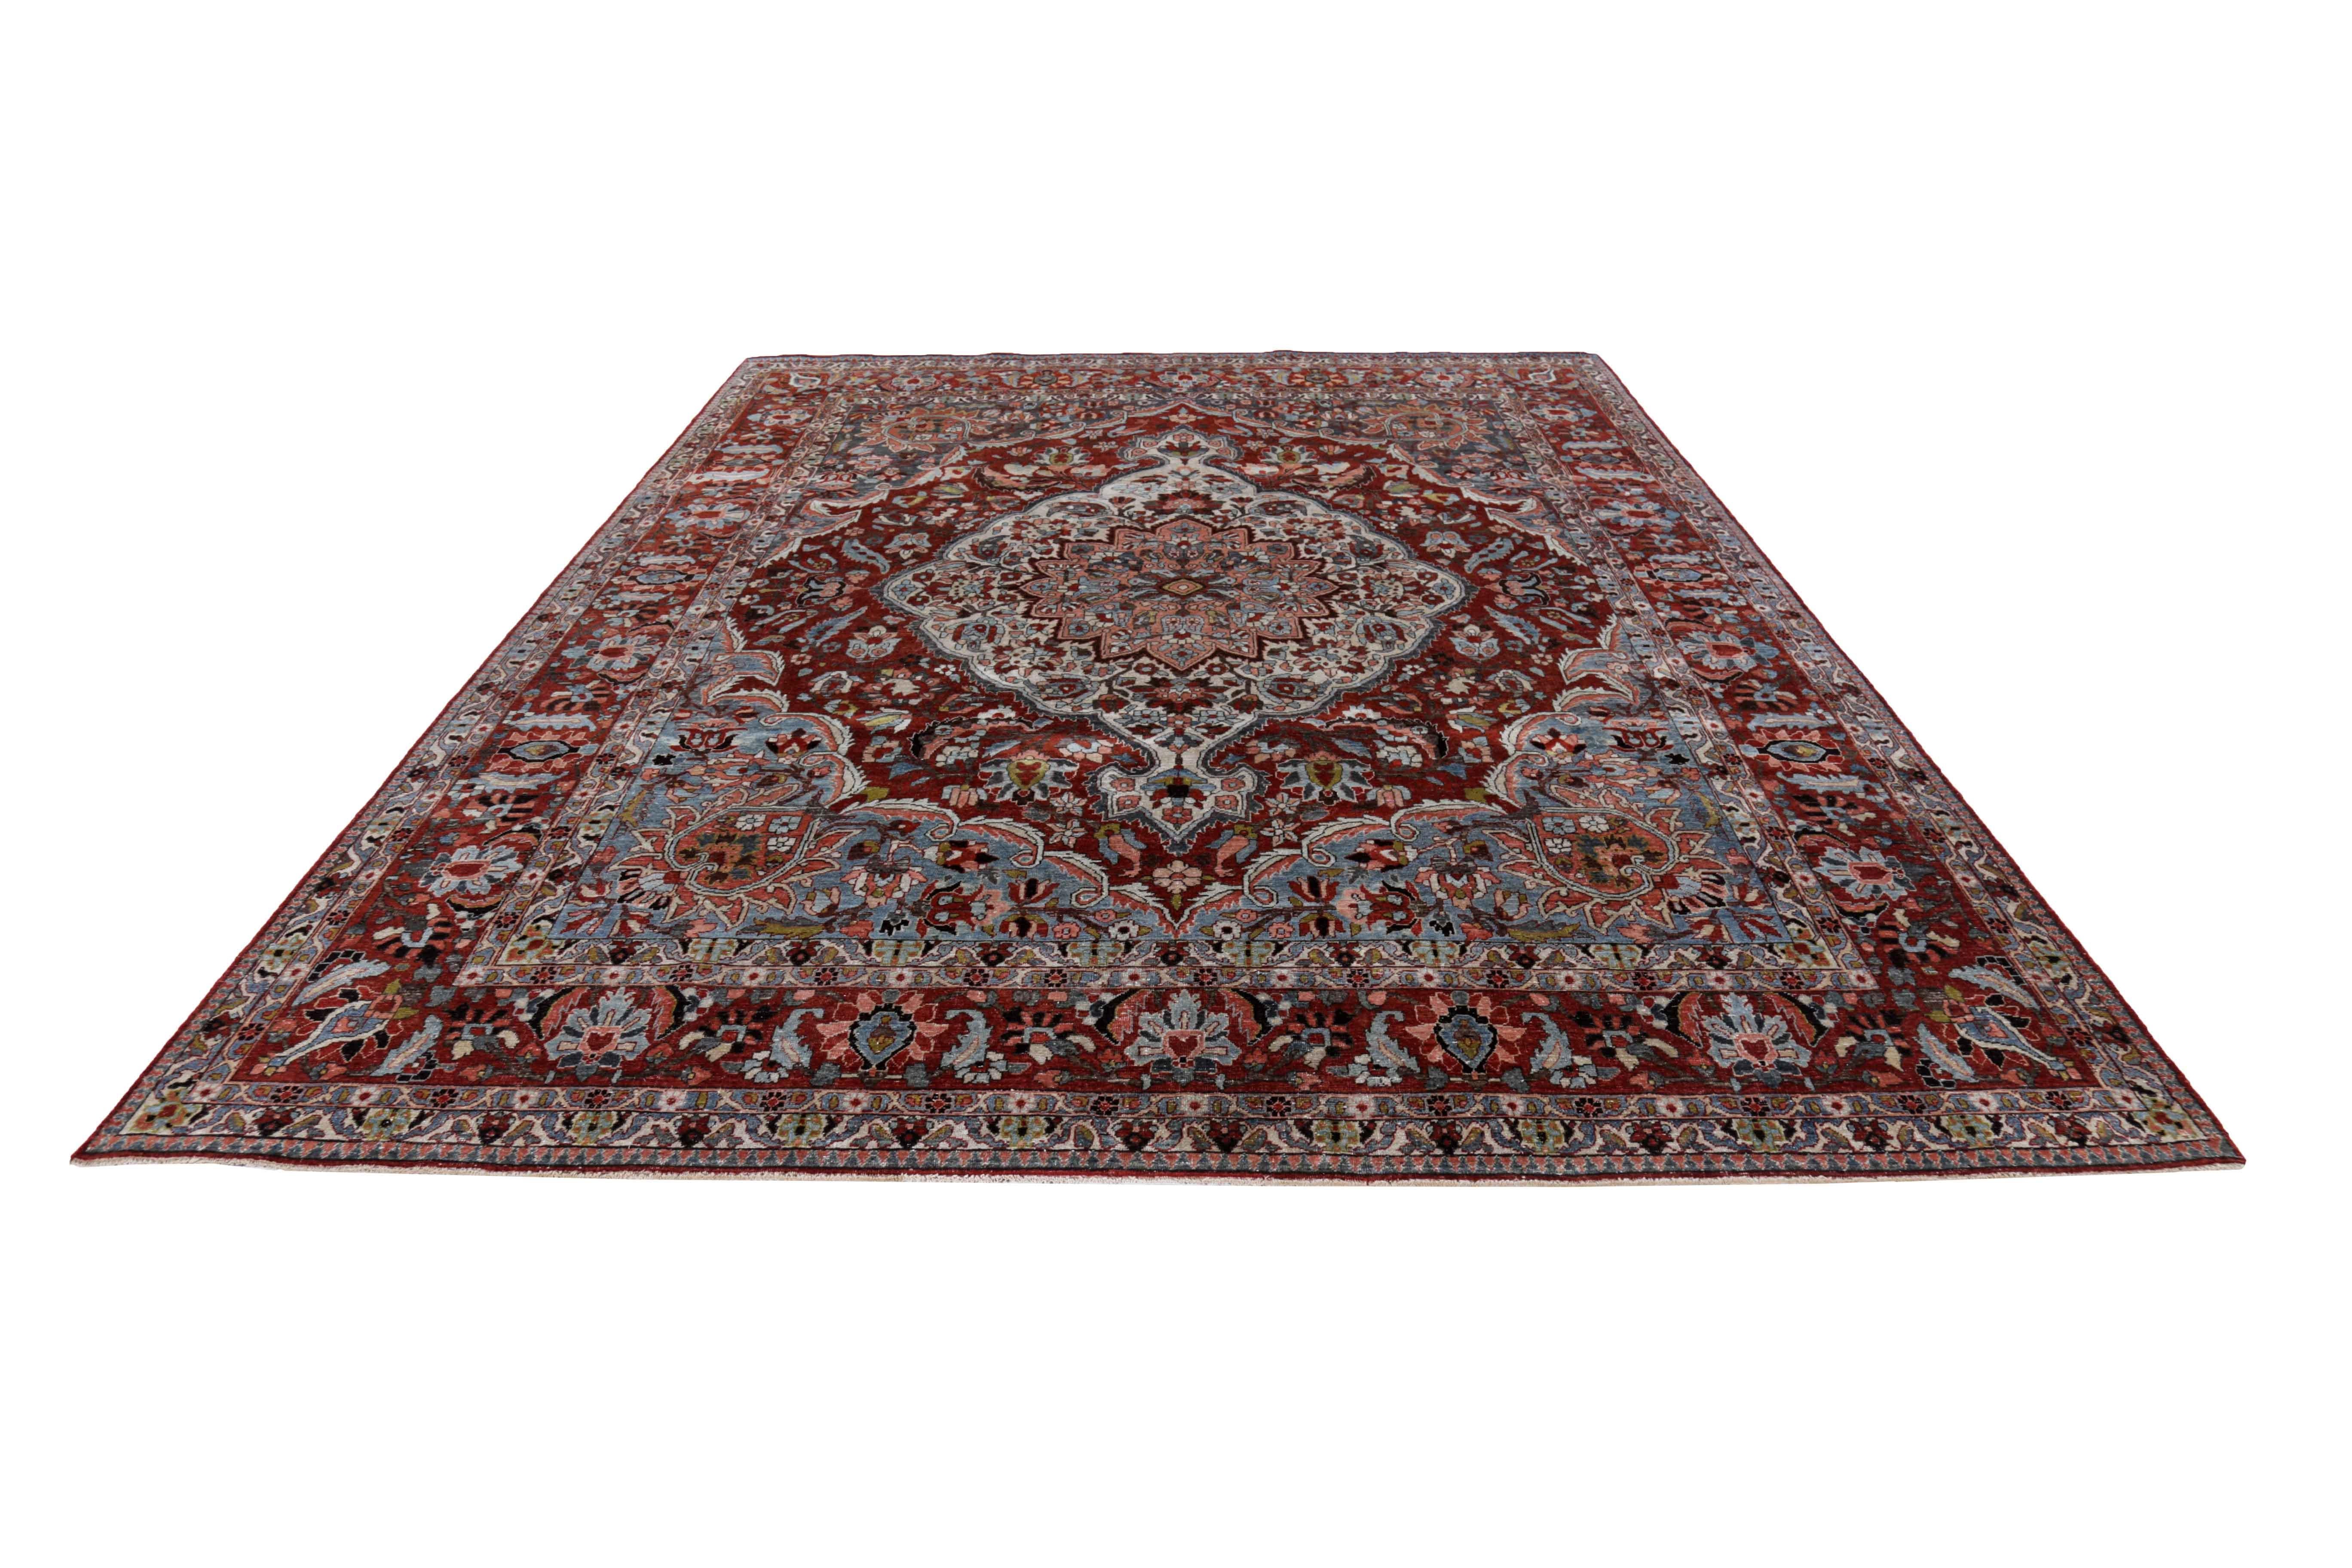 Antique Persian area rug handwoven from the finest sheep’s wool. It’s colored with all-natural vegetable dyes that are safe for humans and pets. It’s a traditional Bakhtiar design handwoven by expert artisans. It’s a lovely area rug that can be